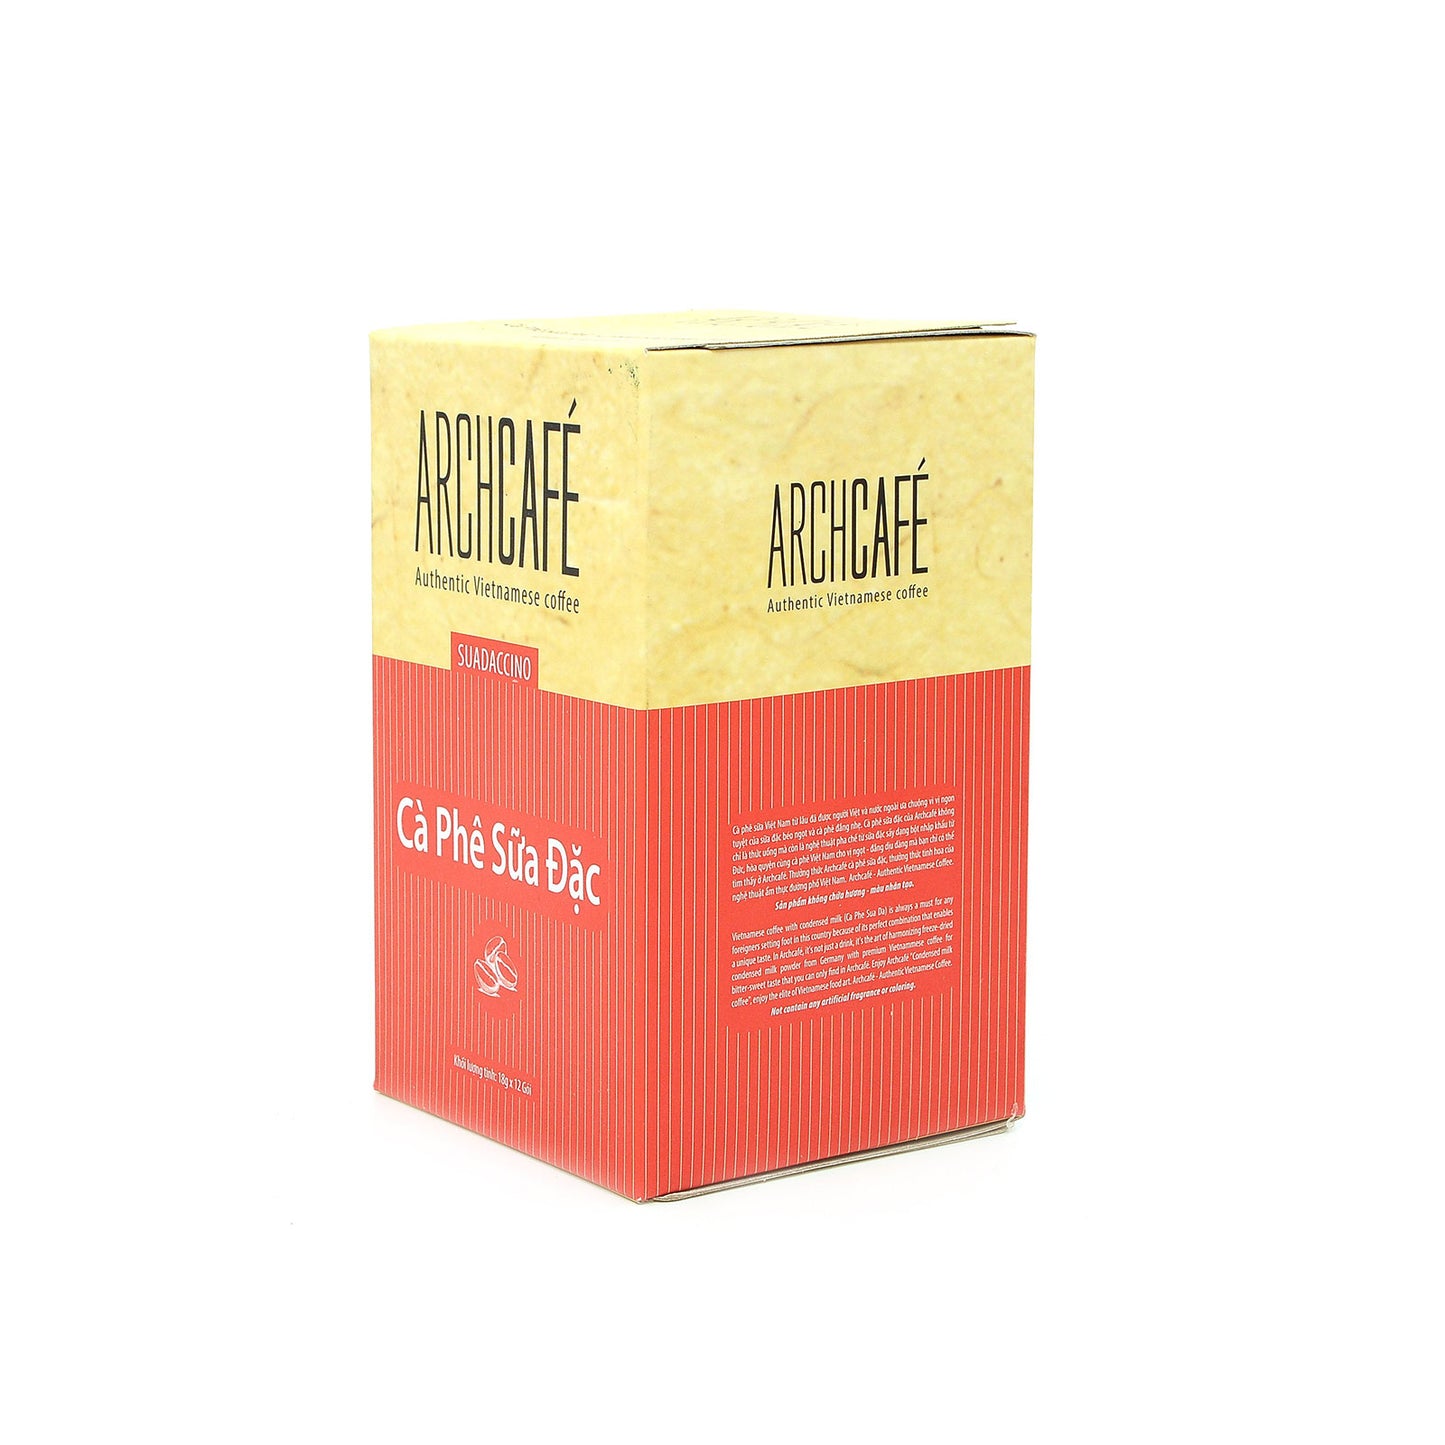 Archcafe Authentic Vietnamese Coffee Instant Coffee Instant Beverages